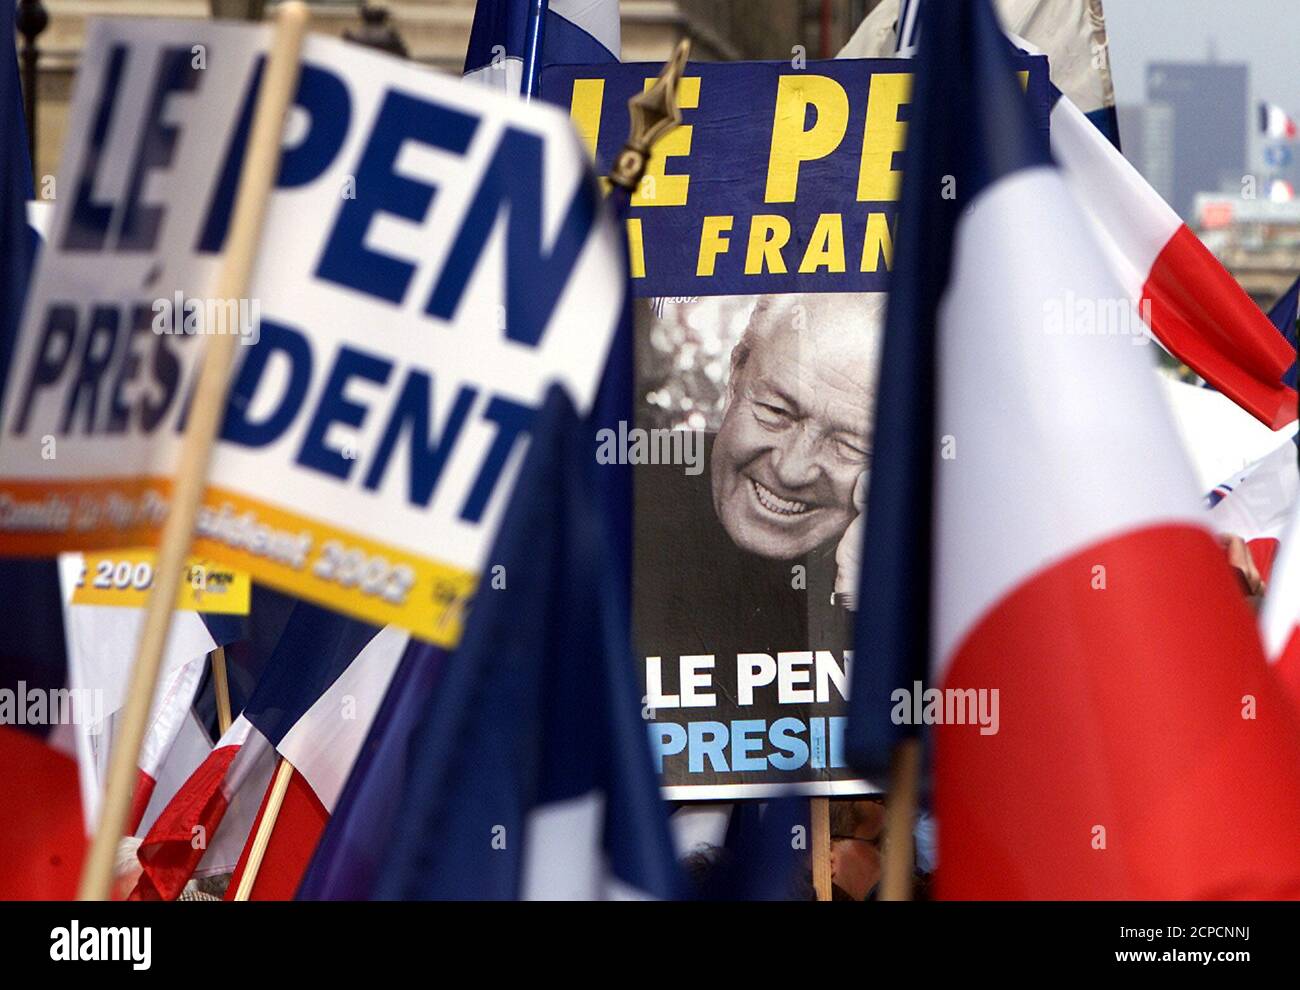 Supporters of French extreme-right National Front presidential candidate  Jean-Marie Le Pen carry flags and campaign posters during a march in Paris,  May 1, 2002. Thousands of supporters join Le Pen for a